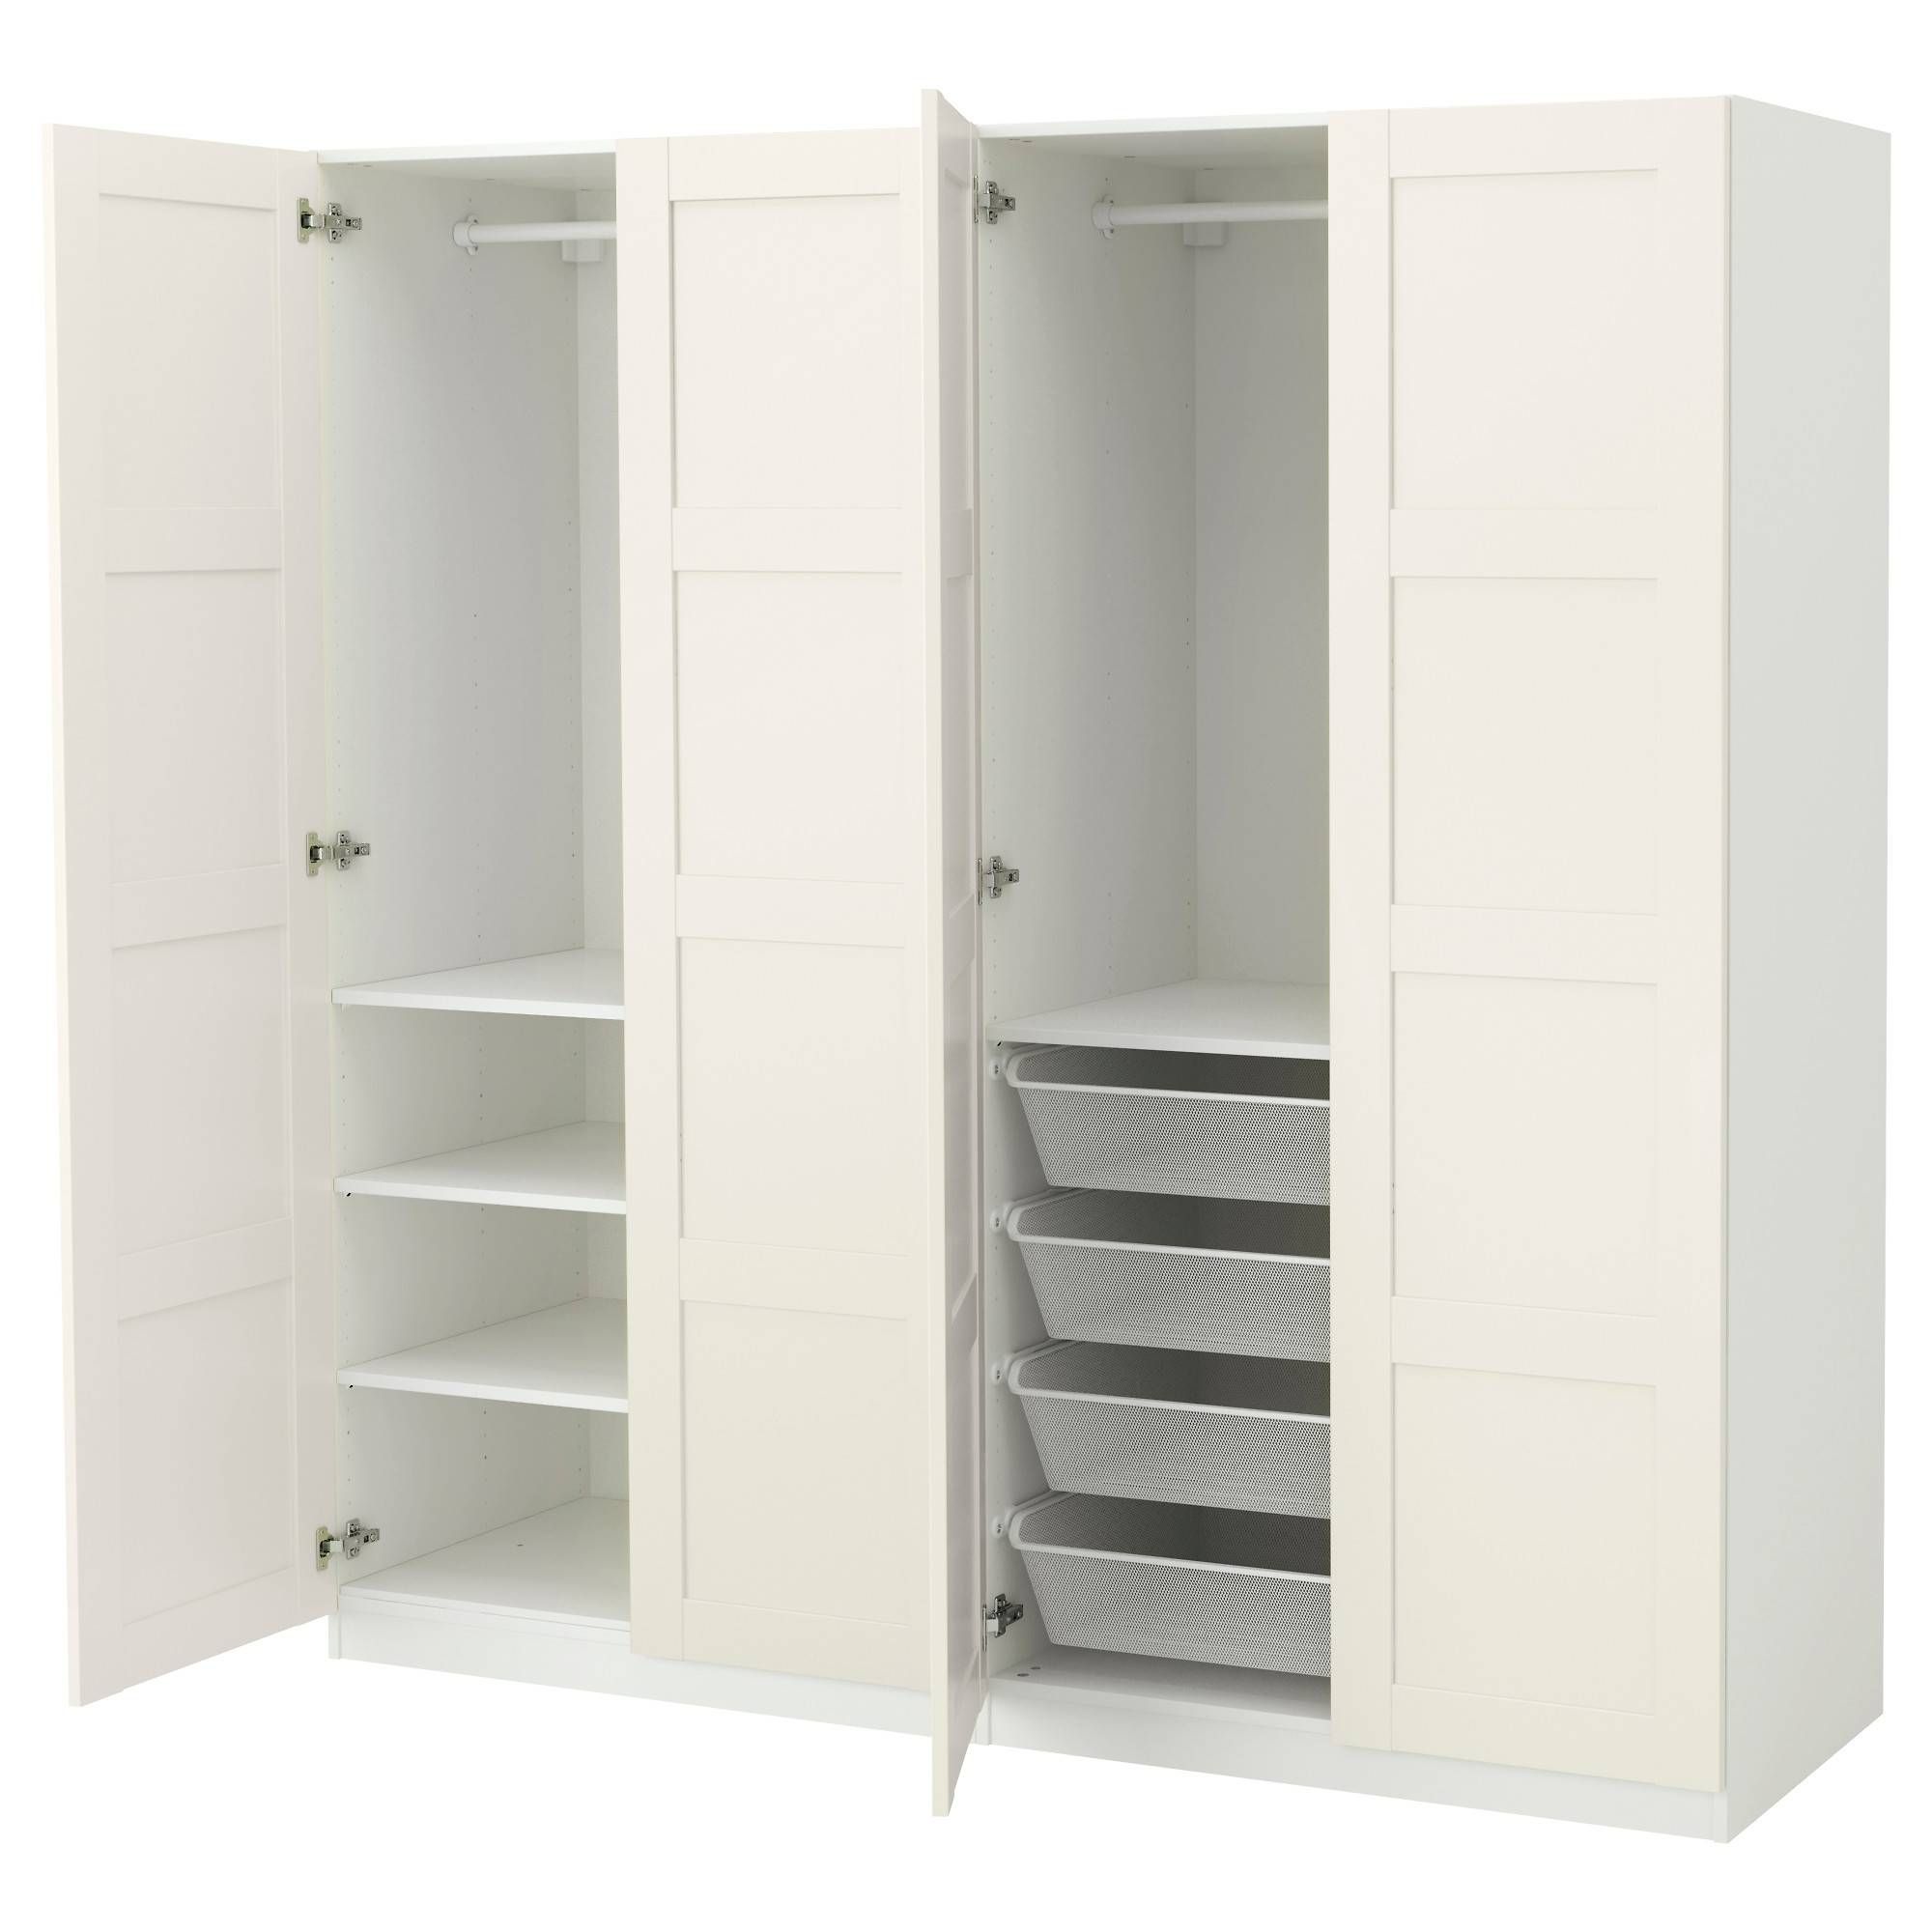 Wardrobes – Pax System – Ikea Inside 2 Door Wardrobe With Drawers And Shelves (View 7 of 30)